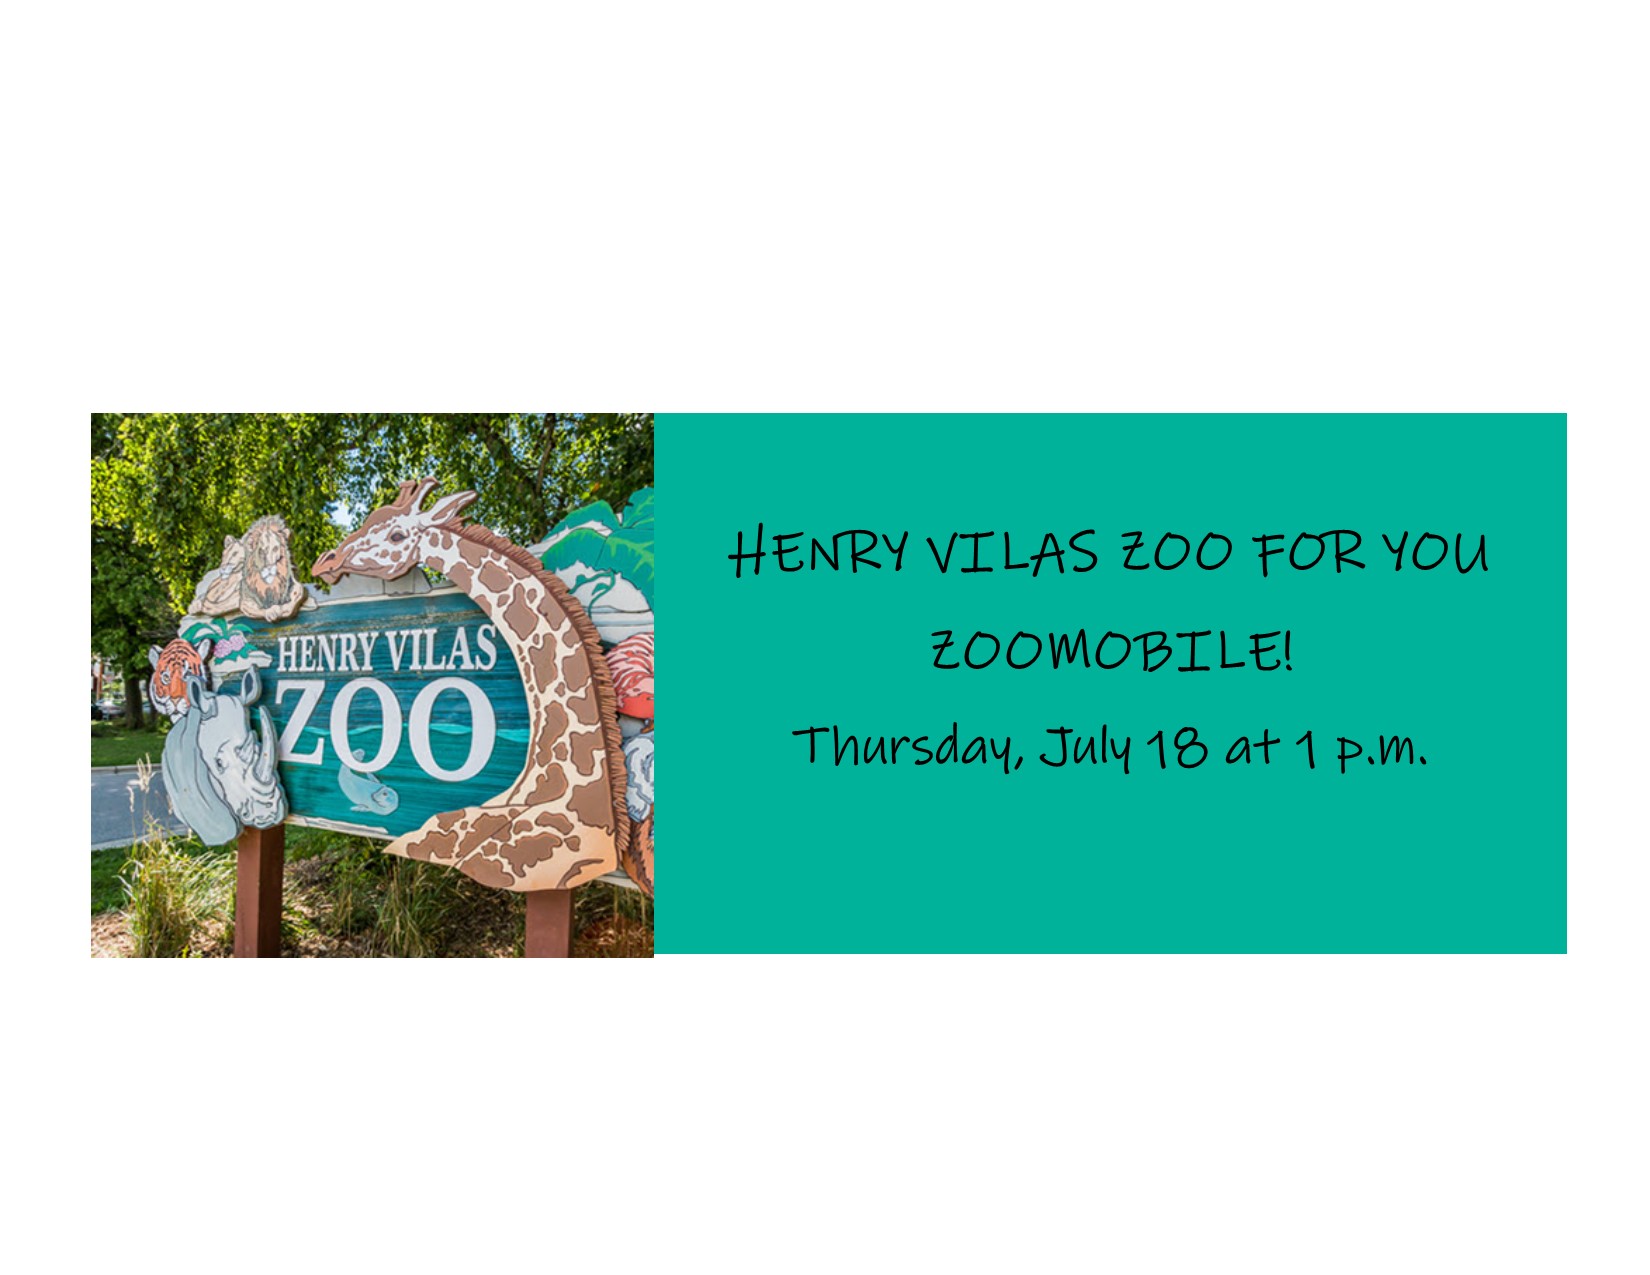 Henry Vilas Zoo for Your - Zoomobile!